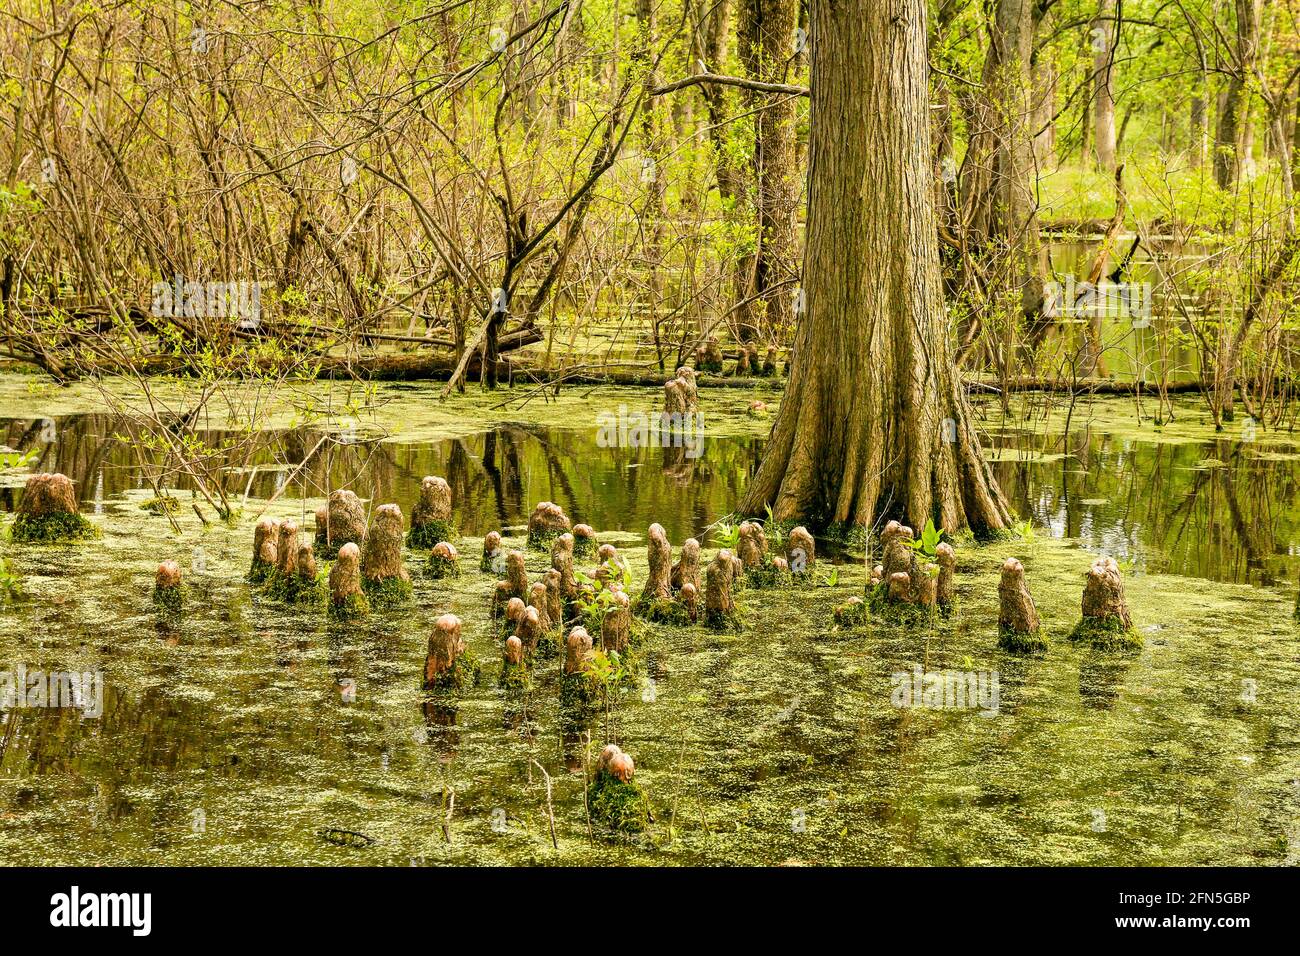 Bald cypress tree and cypress knees, duckweed covered swamp. Salt Creek Nature Preserve, Cook County, Illinois. Stock Photo